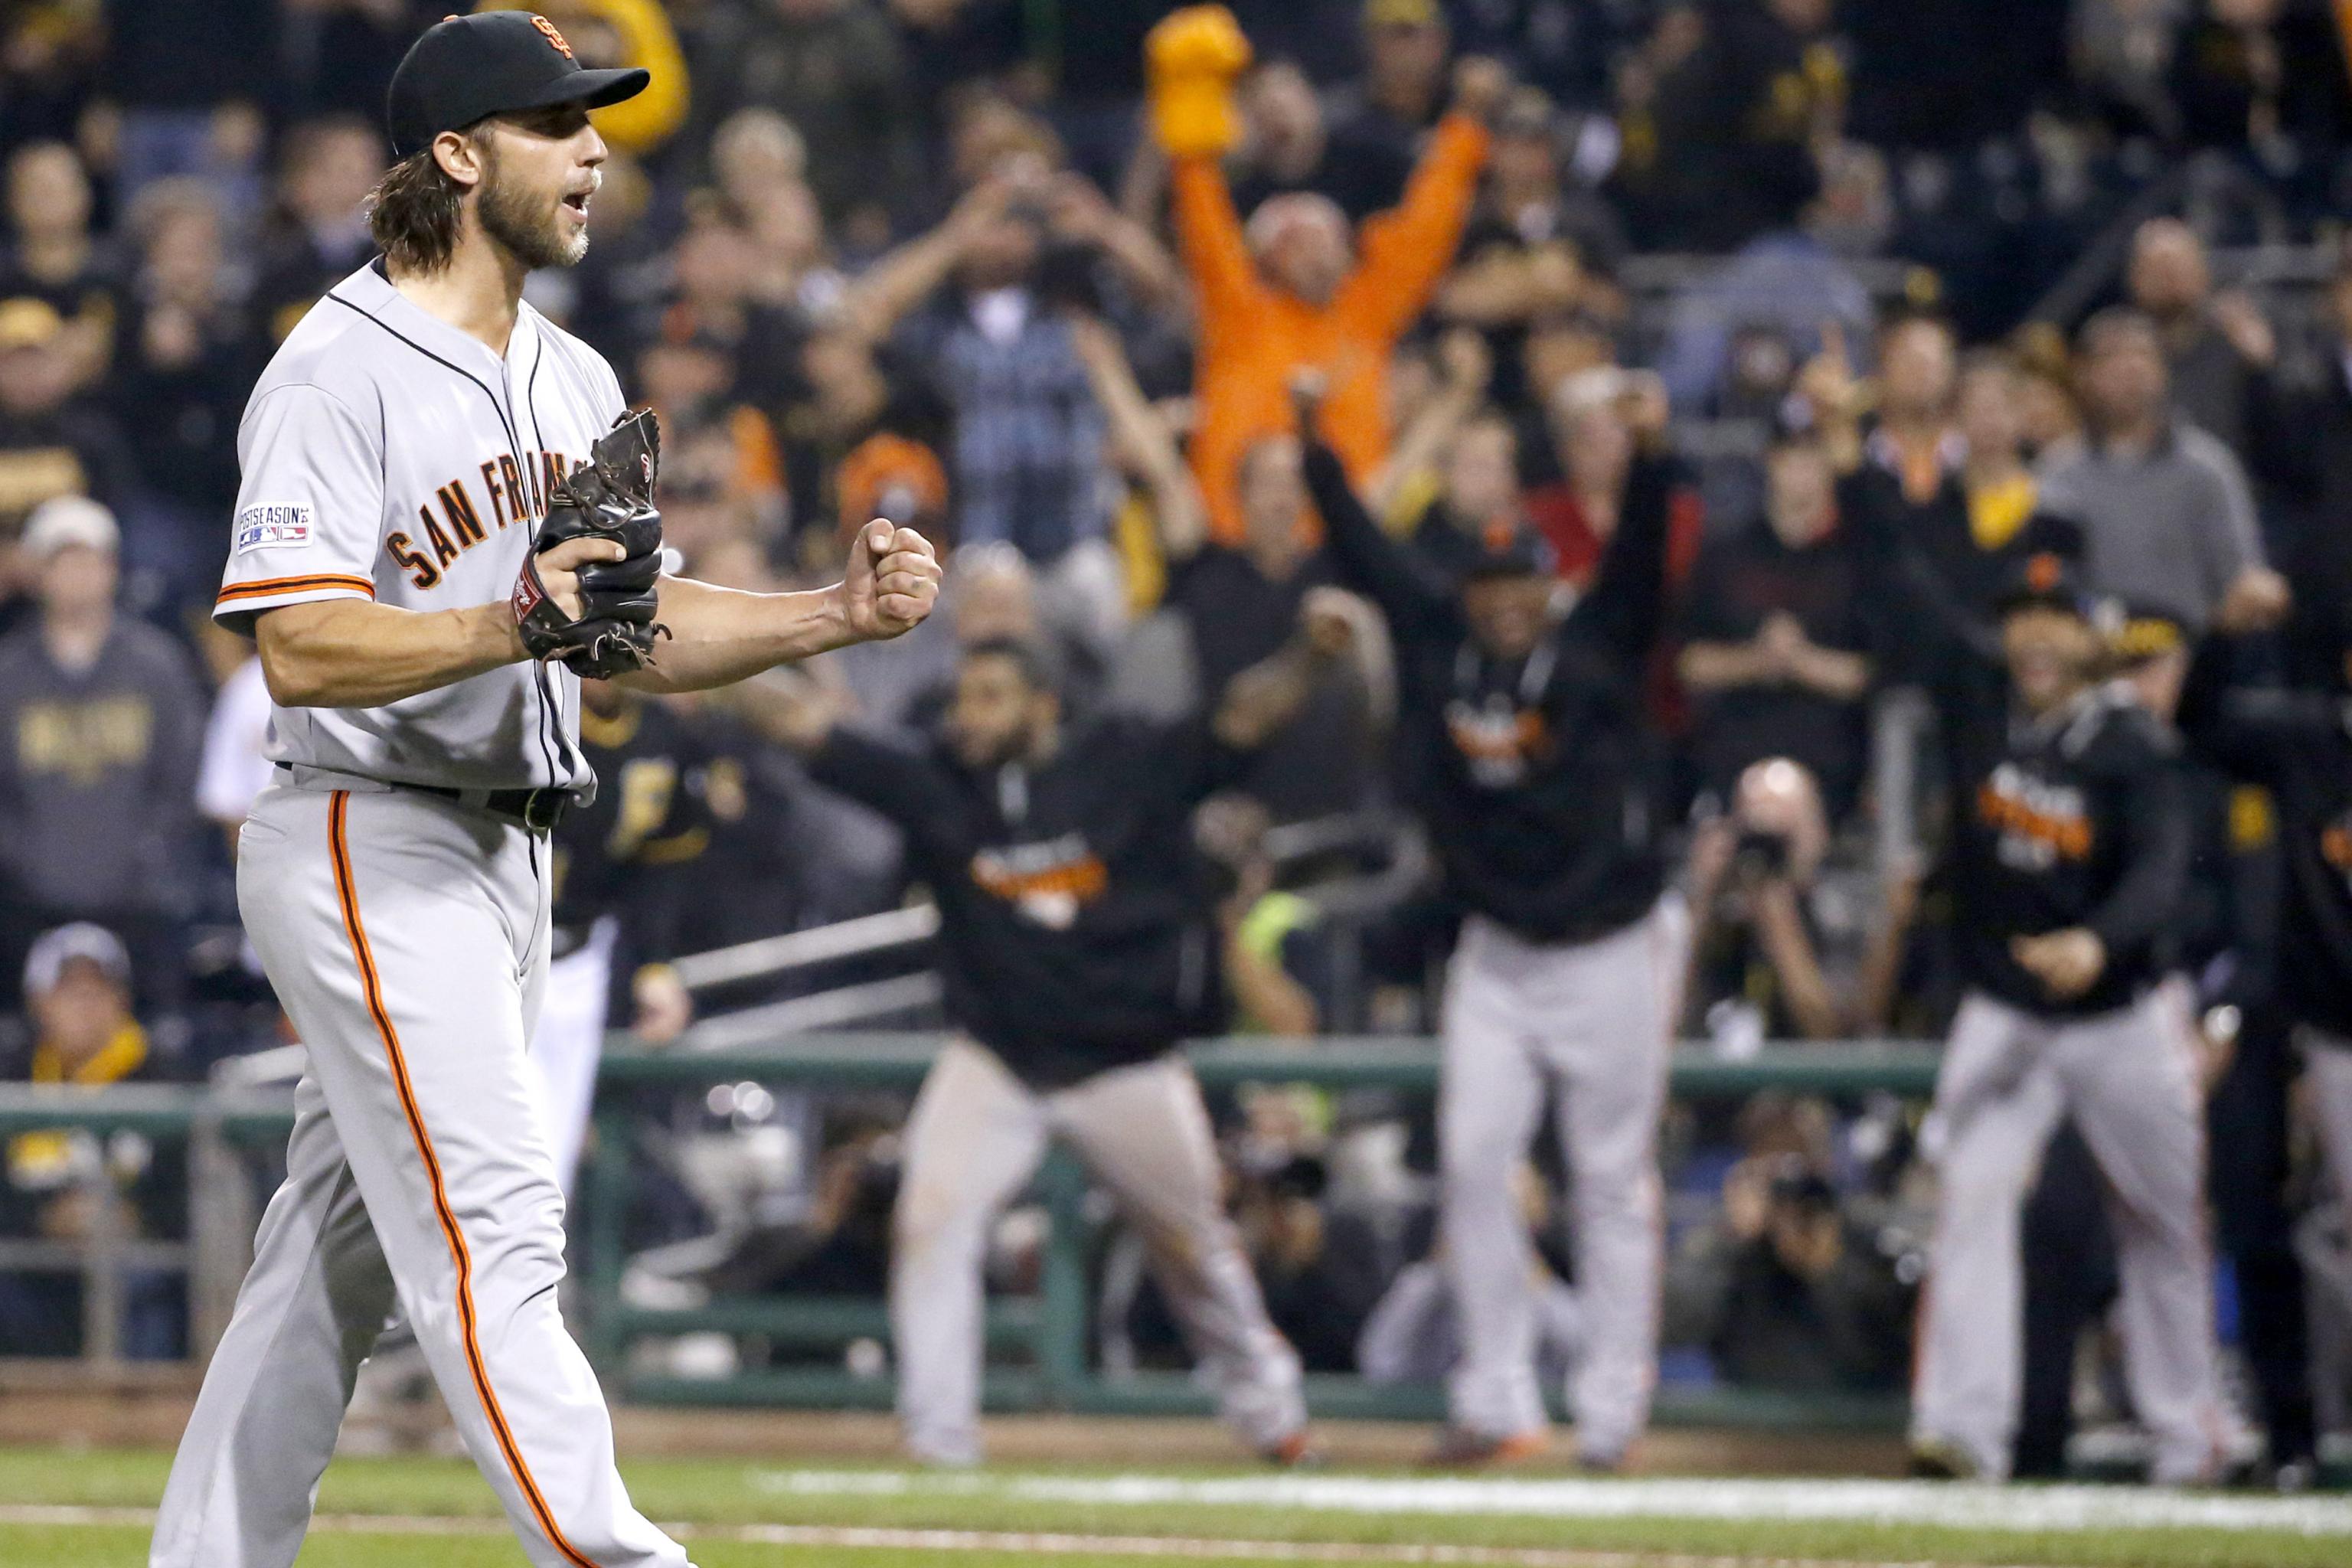 2014 MLB playoffs: Why Giants and Pirates look evenly matched